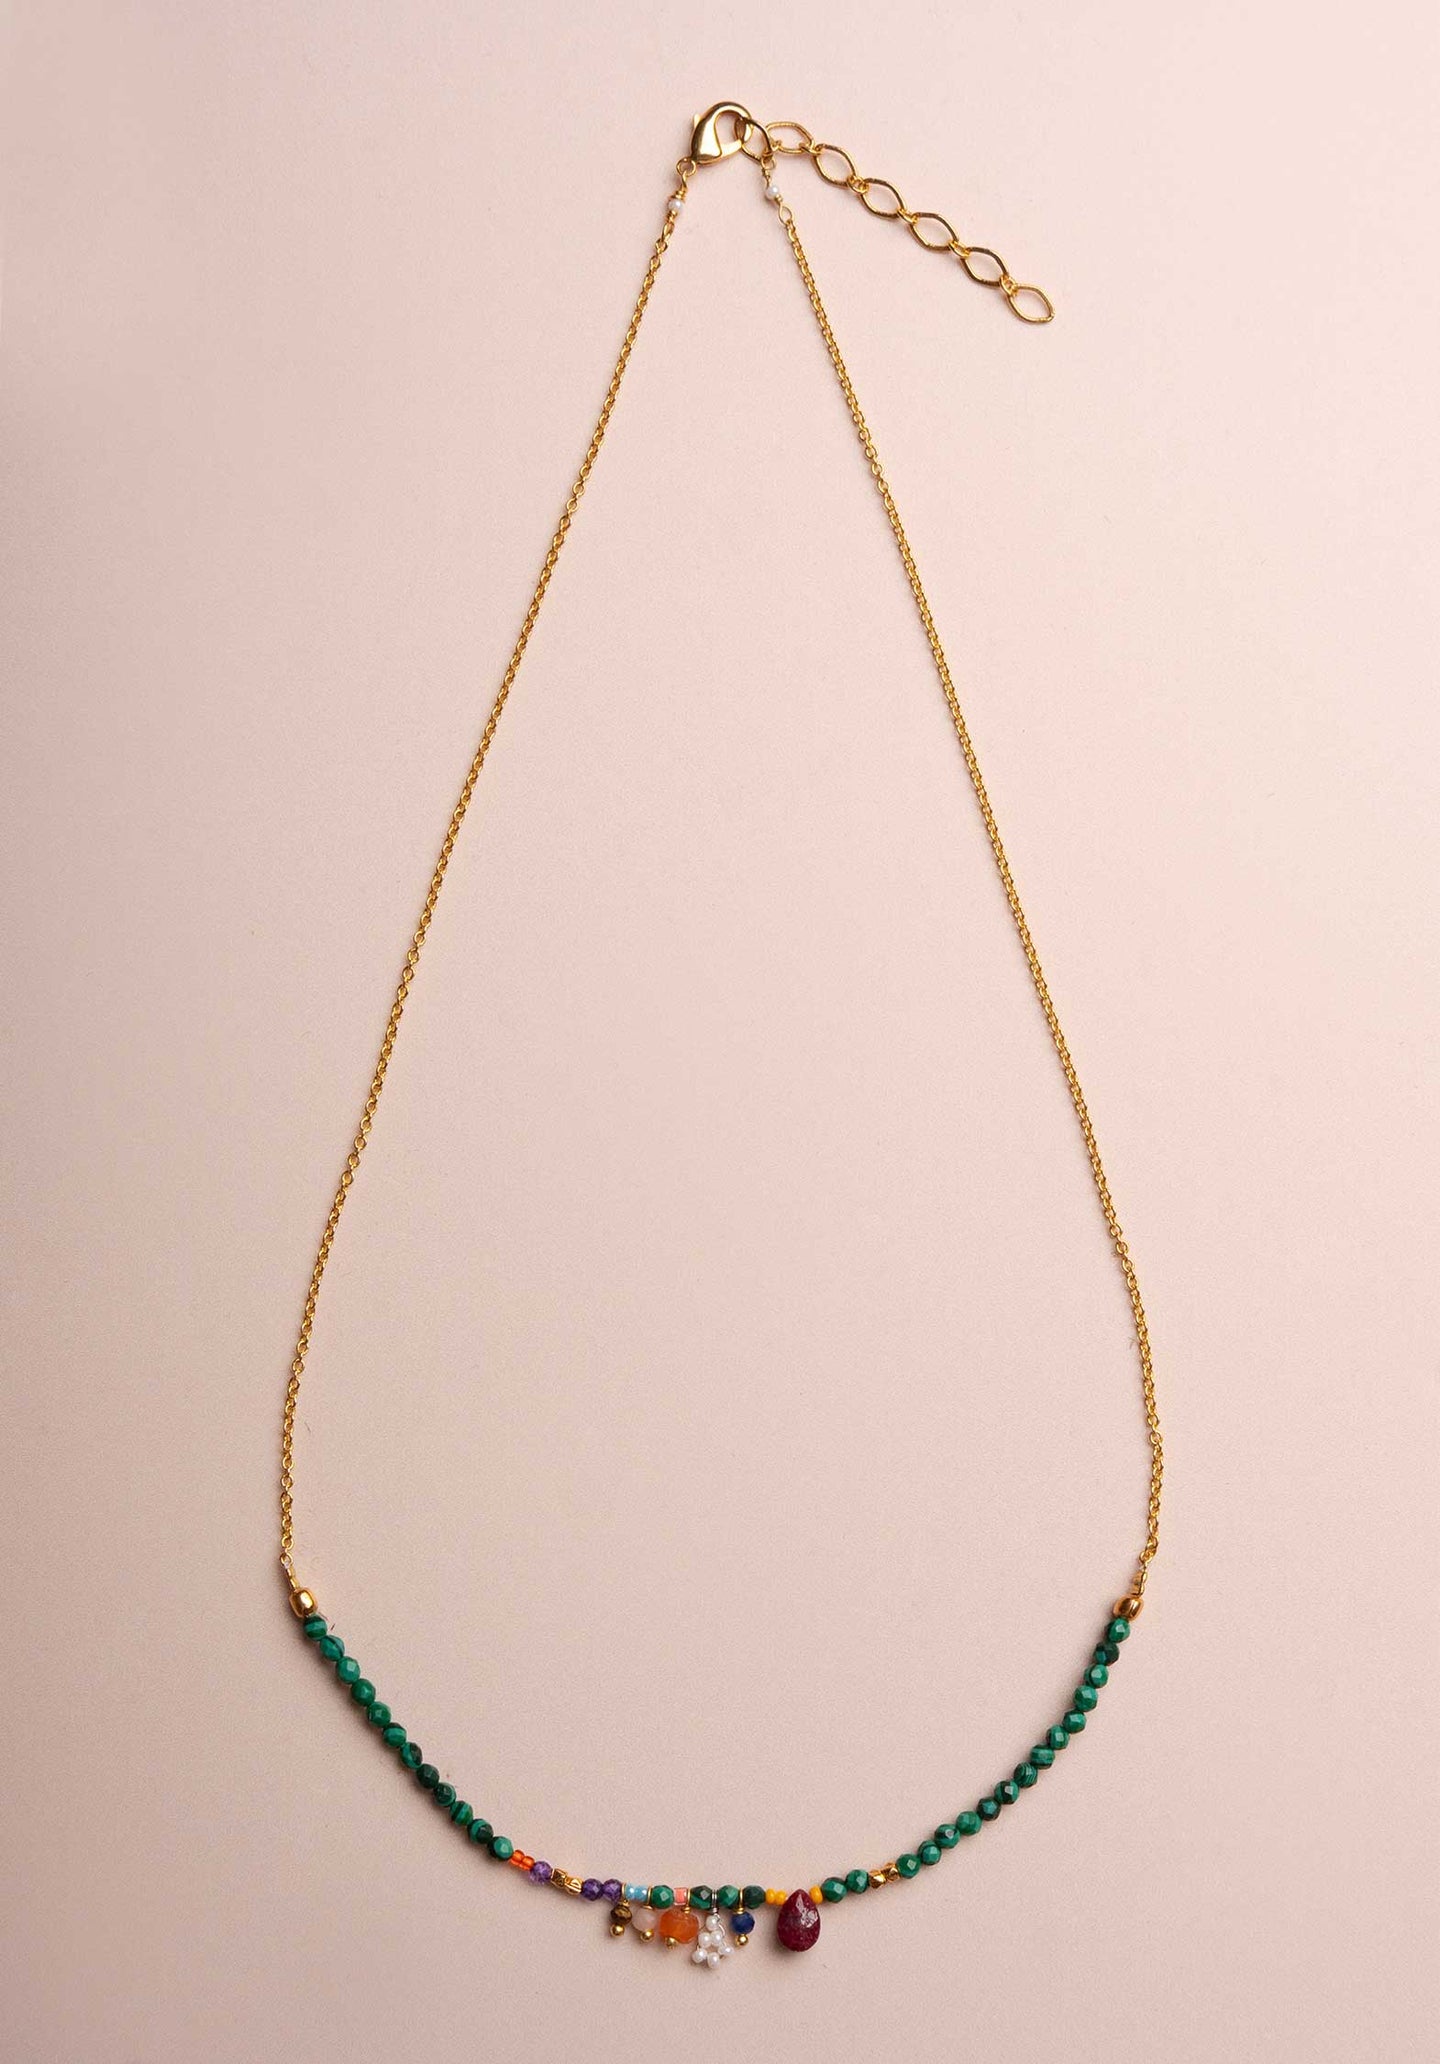 Necklace Fdc00016 Gold